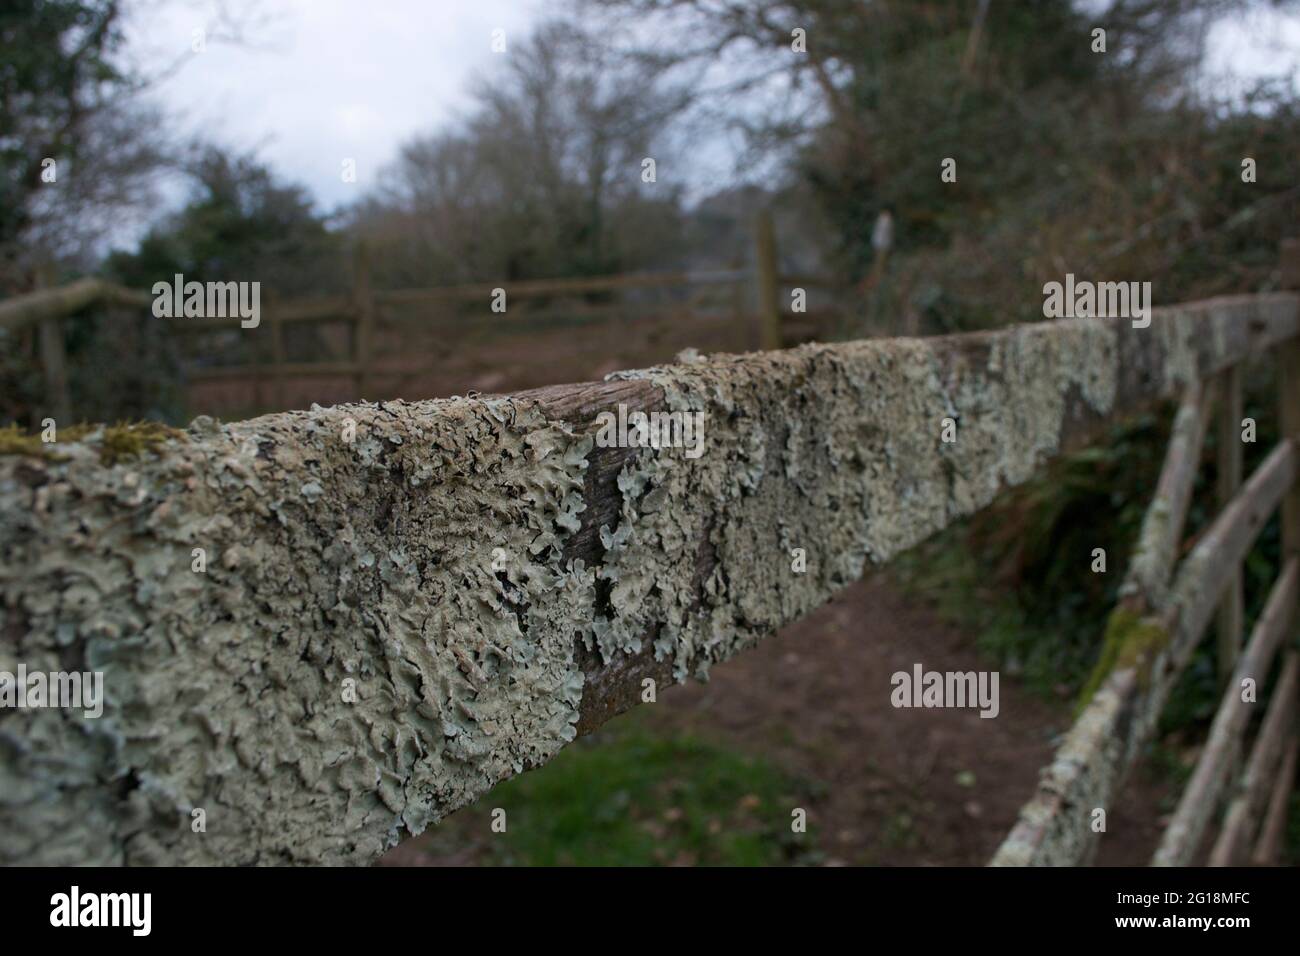 Detail of the top slat of a five bar gate in a wooden fence. Covered in grey lichen and mossy growths, showing the age of this very old piece of wood. Stock Photo